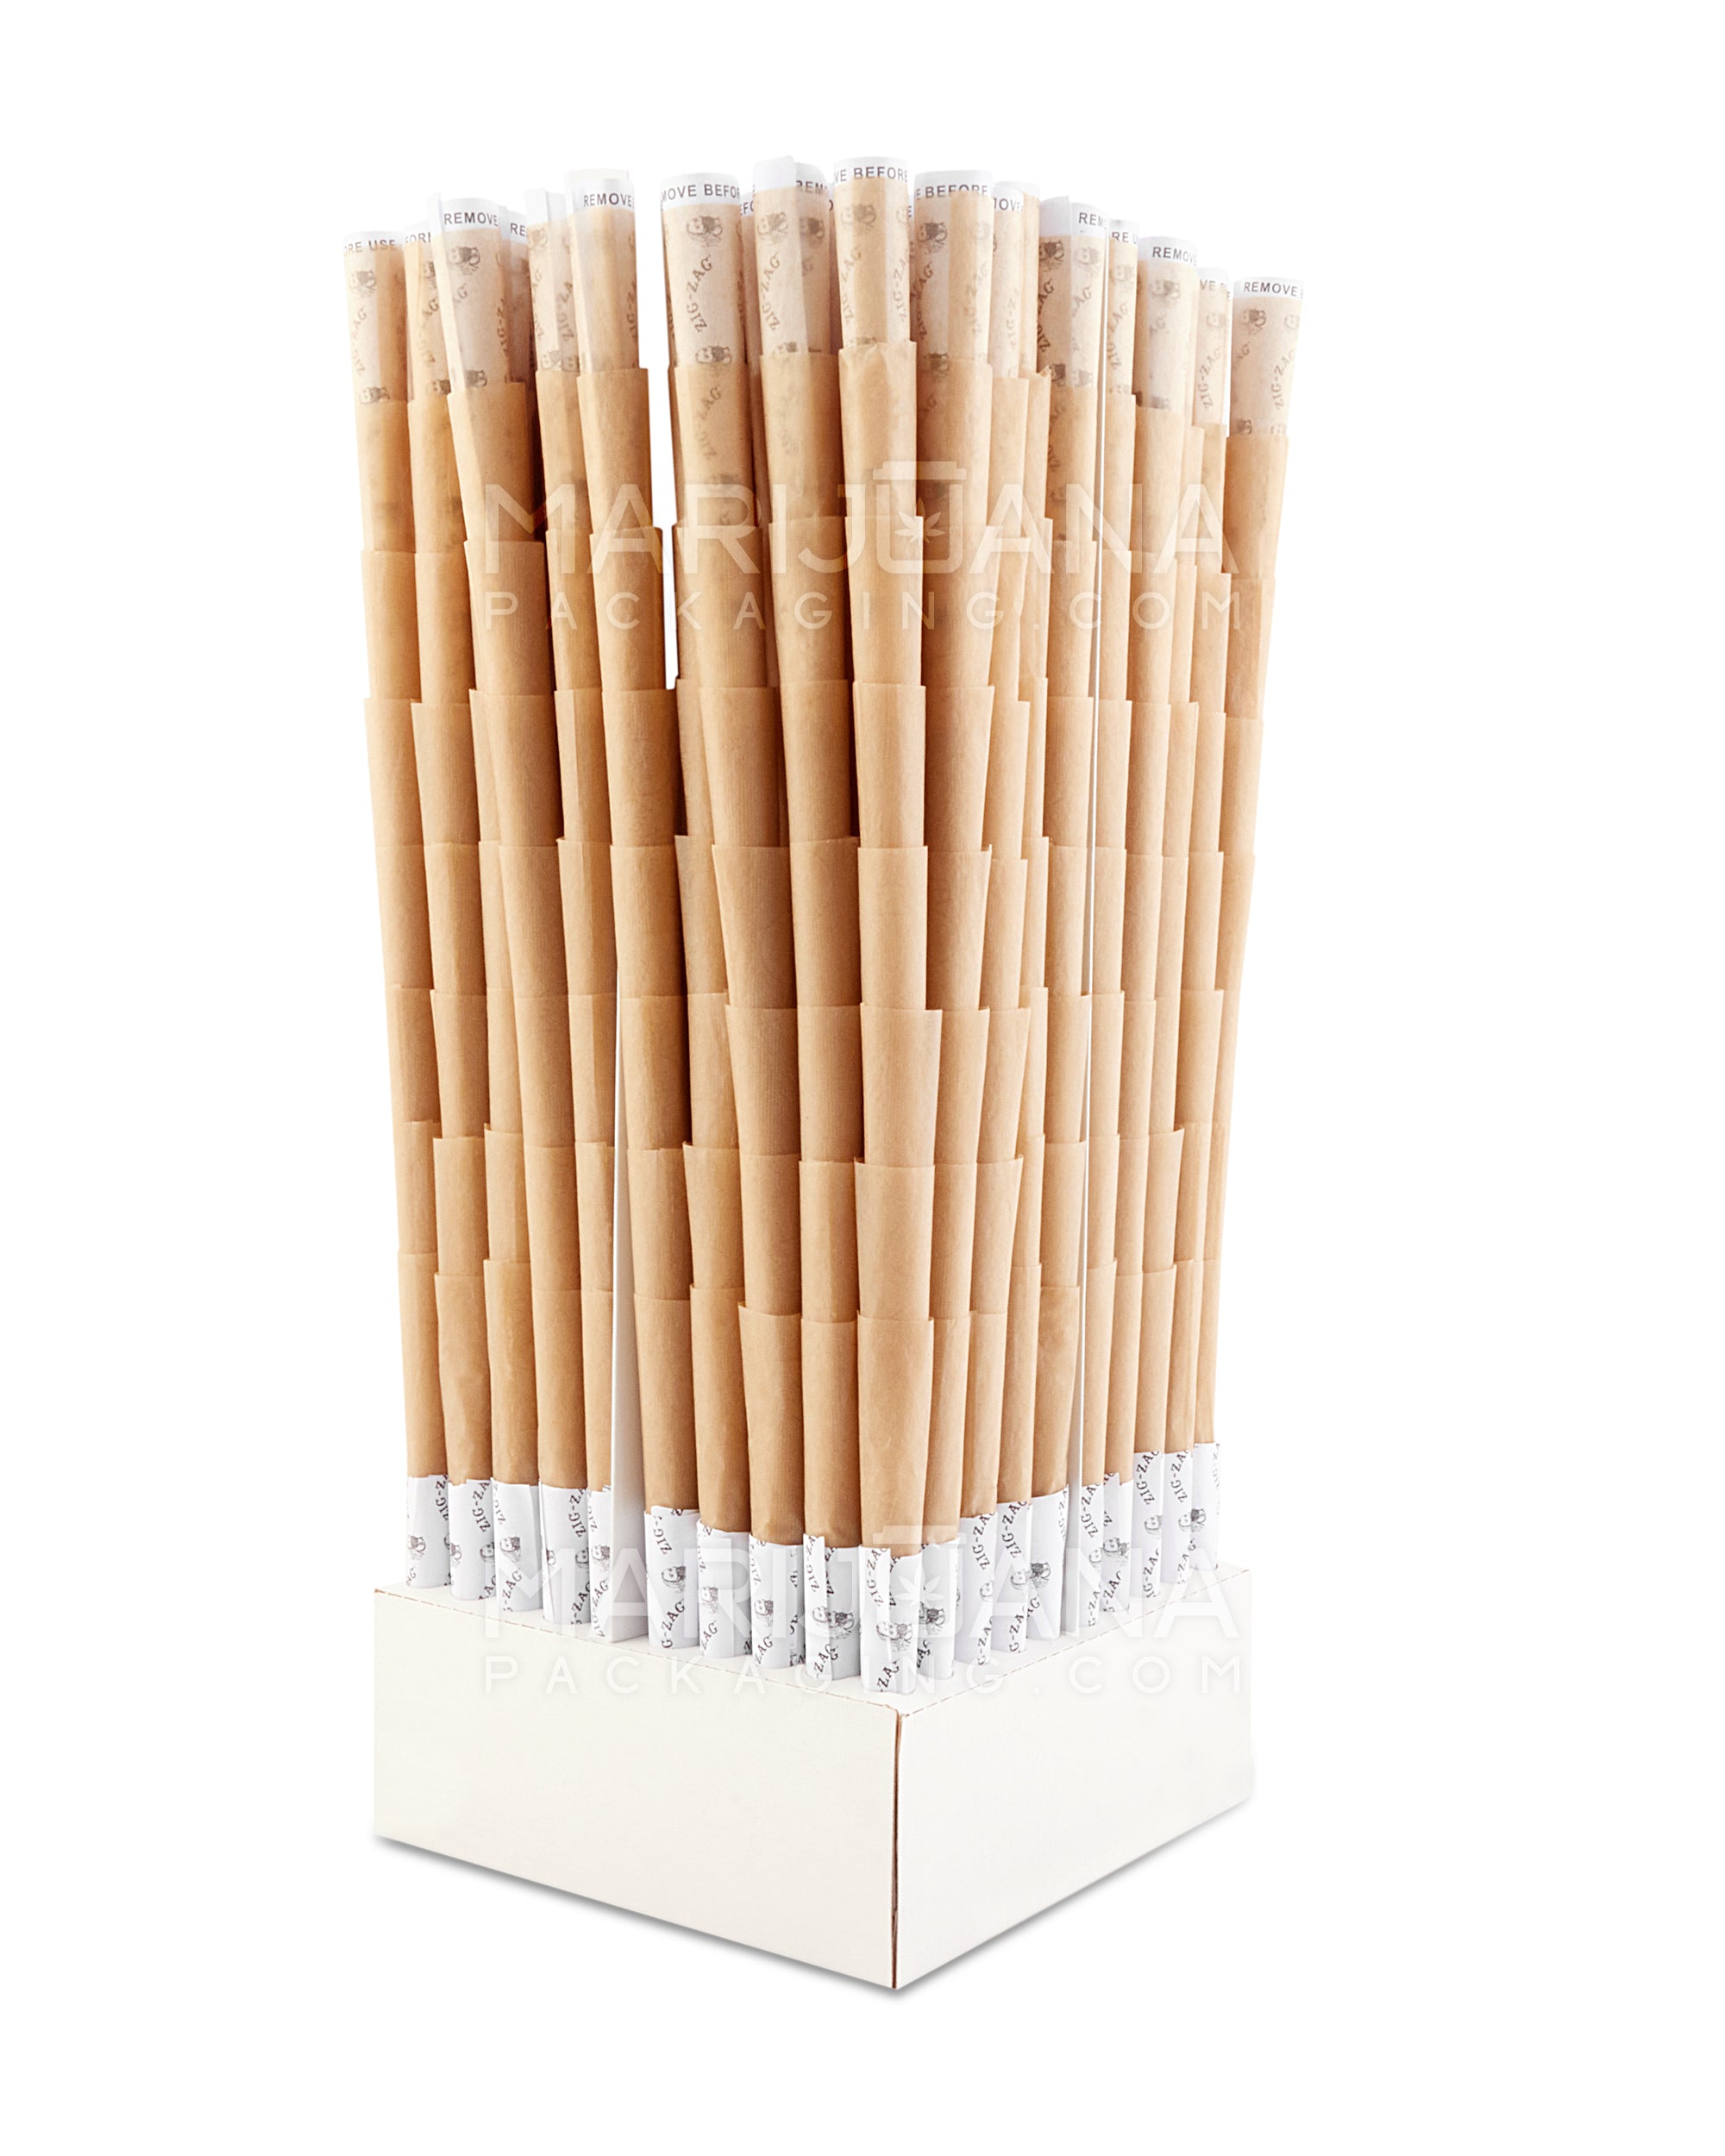 ZIG ZAG | King Size Pre-Rolled Cones w/ Blank Tips | 109mm - Unbleached Paper - 800 Count